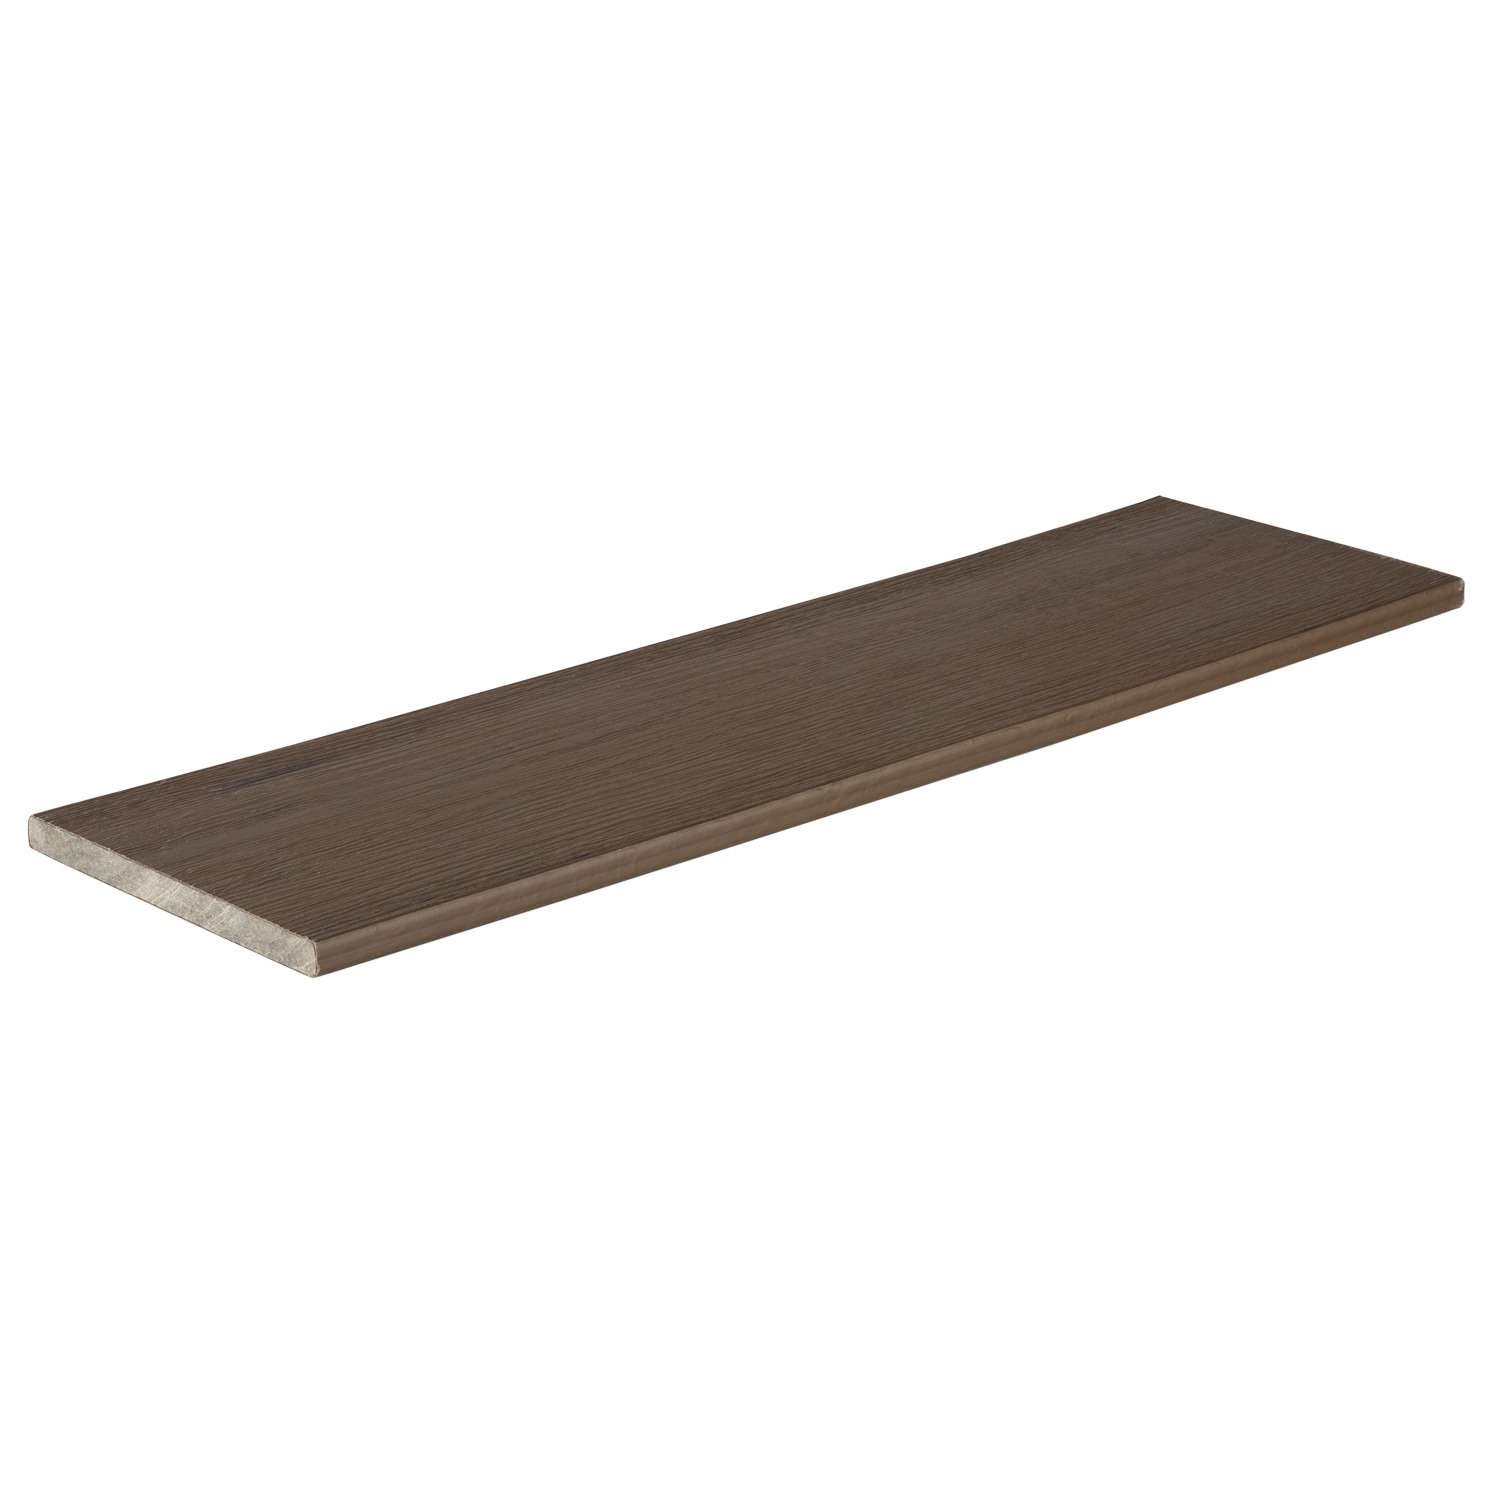 Legacy 0.5-in x 8-in x 12-ft Mocha Square Composite Riser Deck Board in Brown | - TimberTech LCRISERM